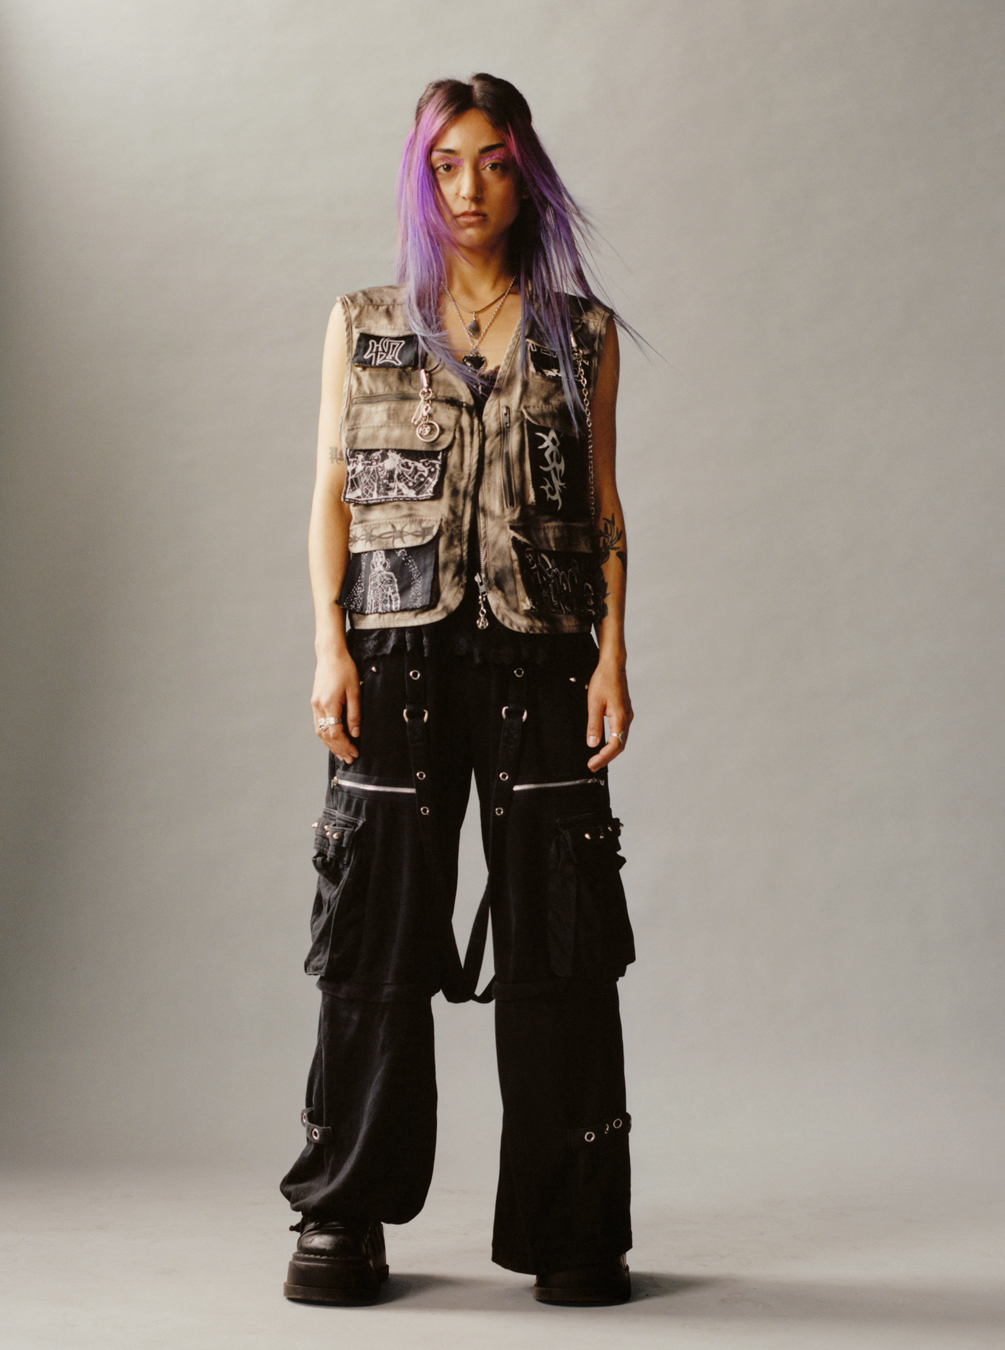 a Lola + Pani photograph of a model with violet hair wearing baggy skate trousers and a utility jacket 